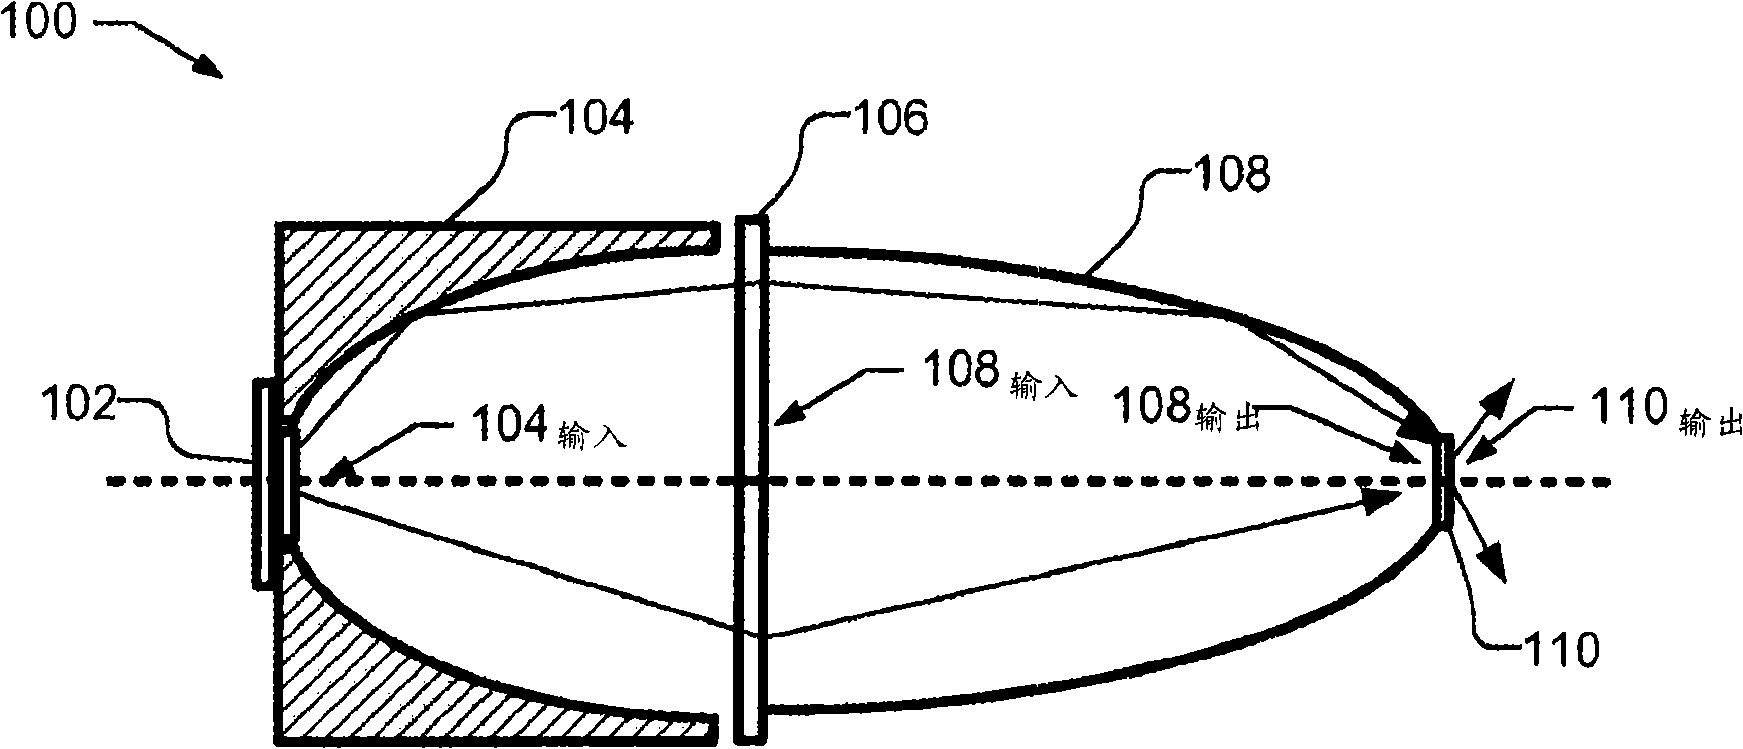 Illumination system with optical concentrator and wavelength converting element